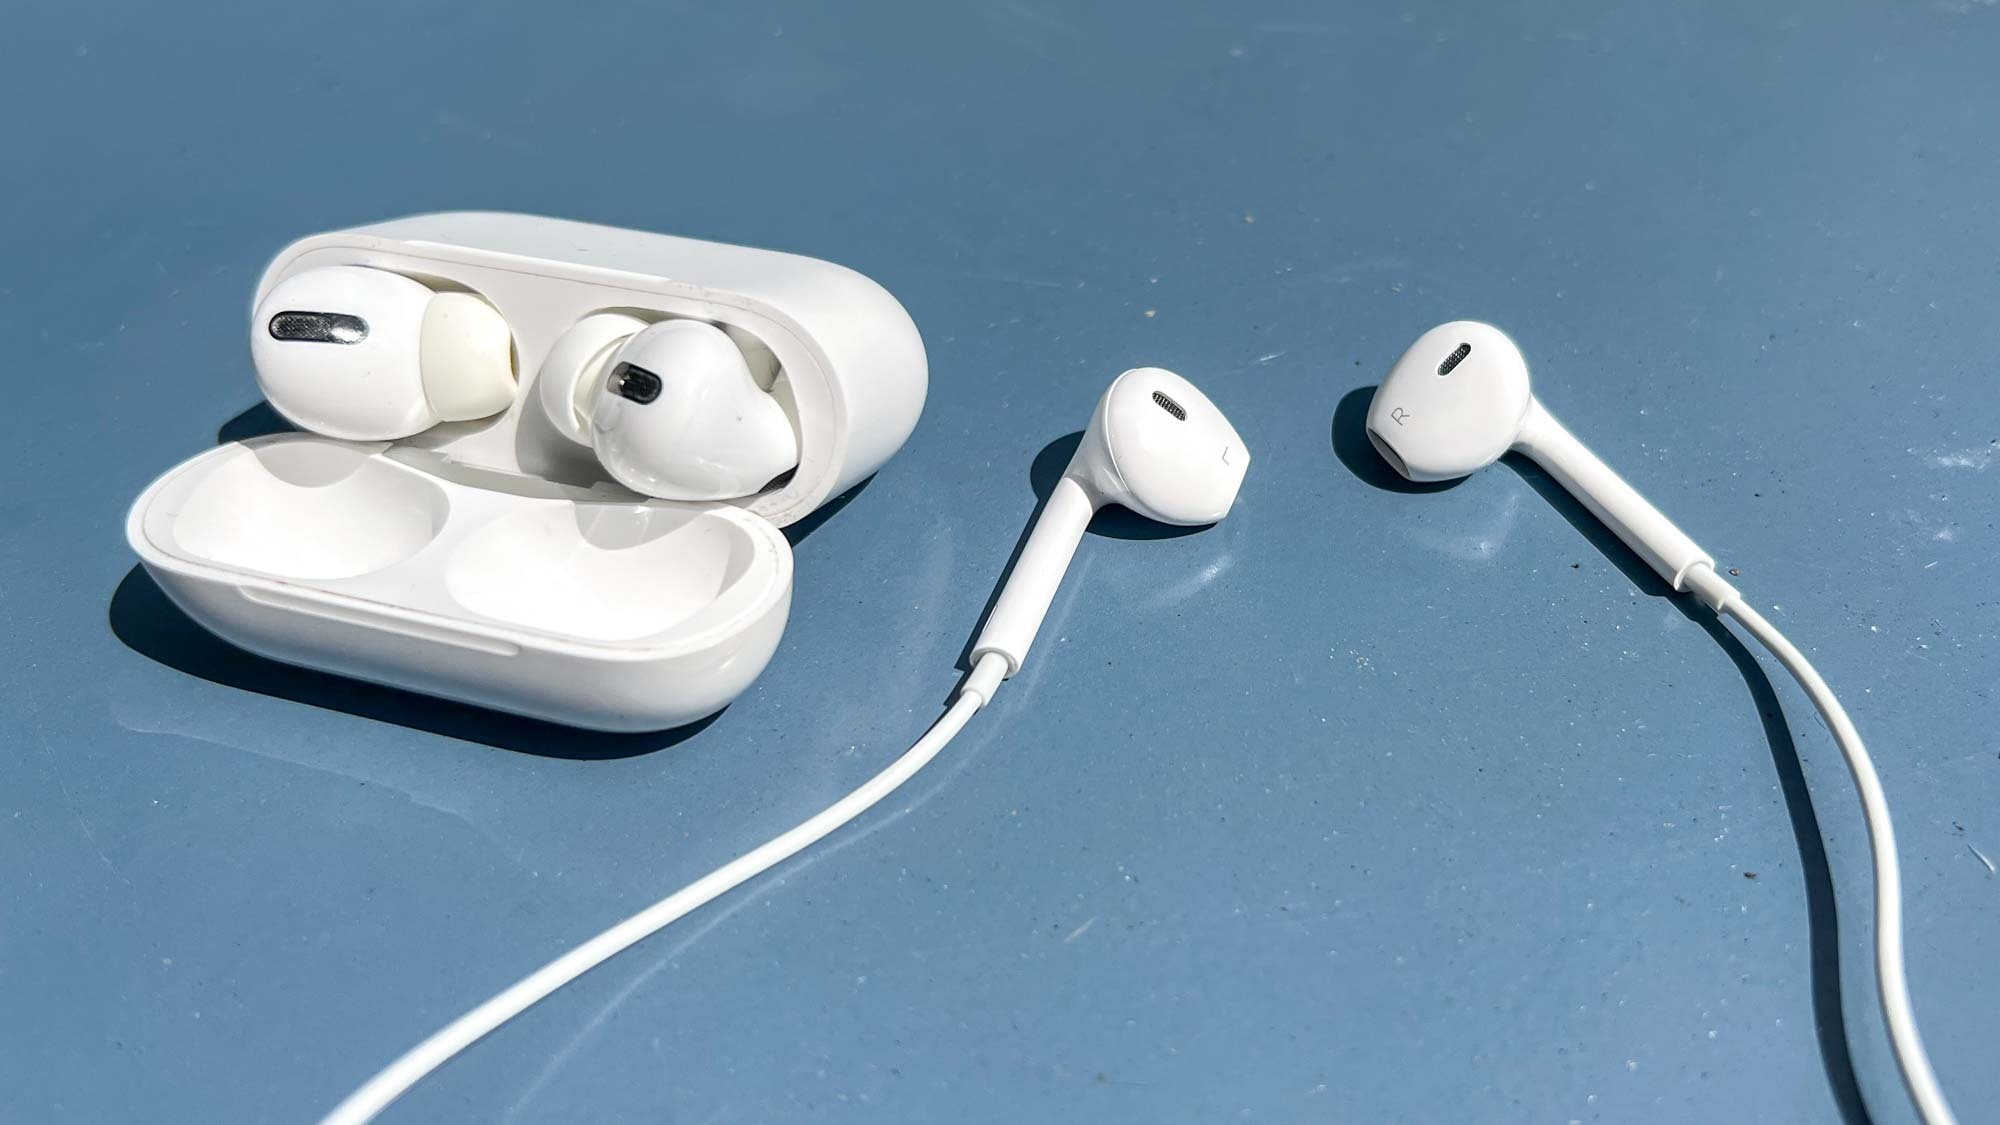 Forget AirPods — EarPods still be the right earbuds for you | Tom's Guide